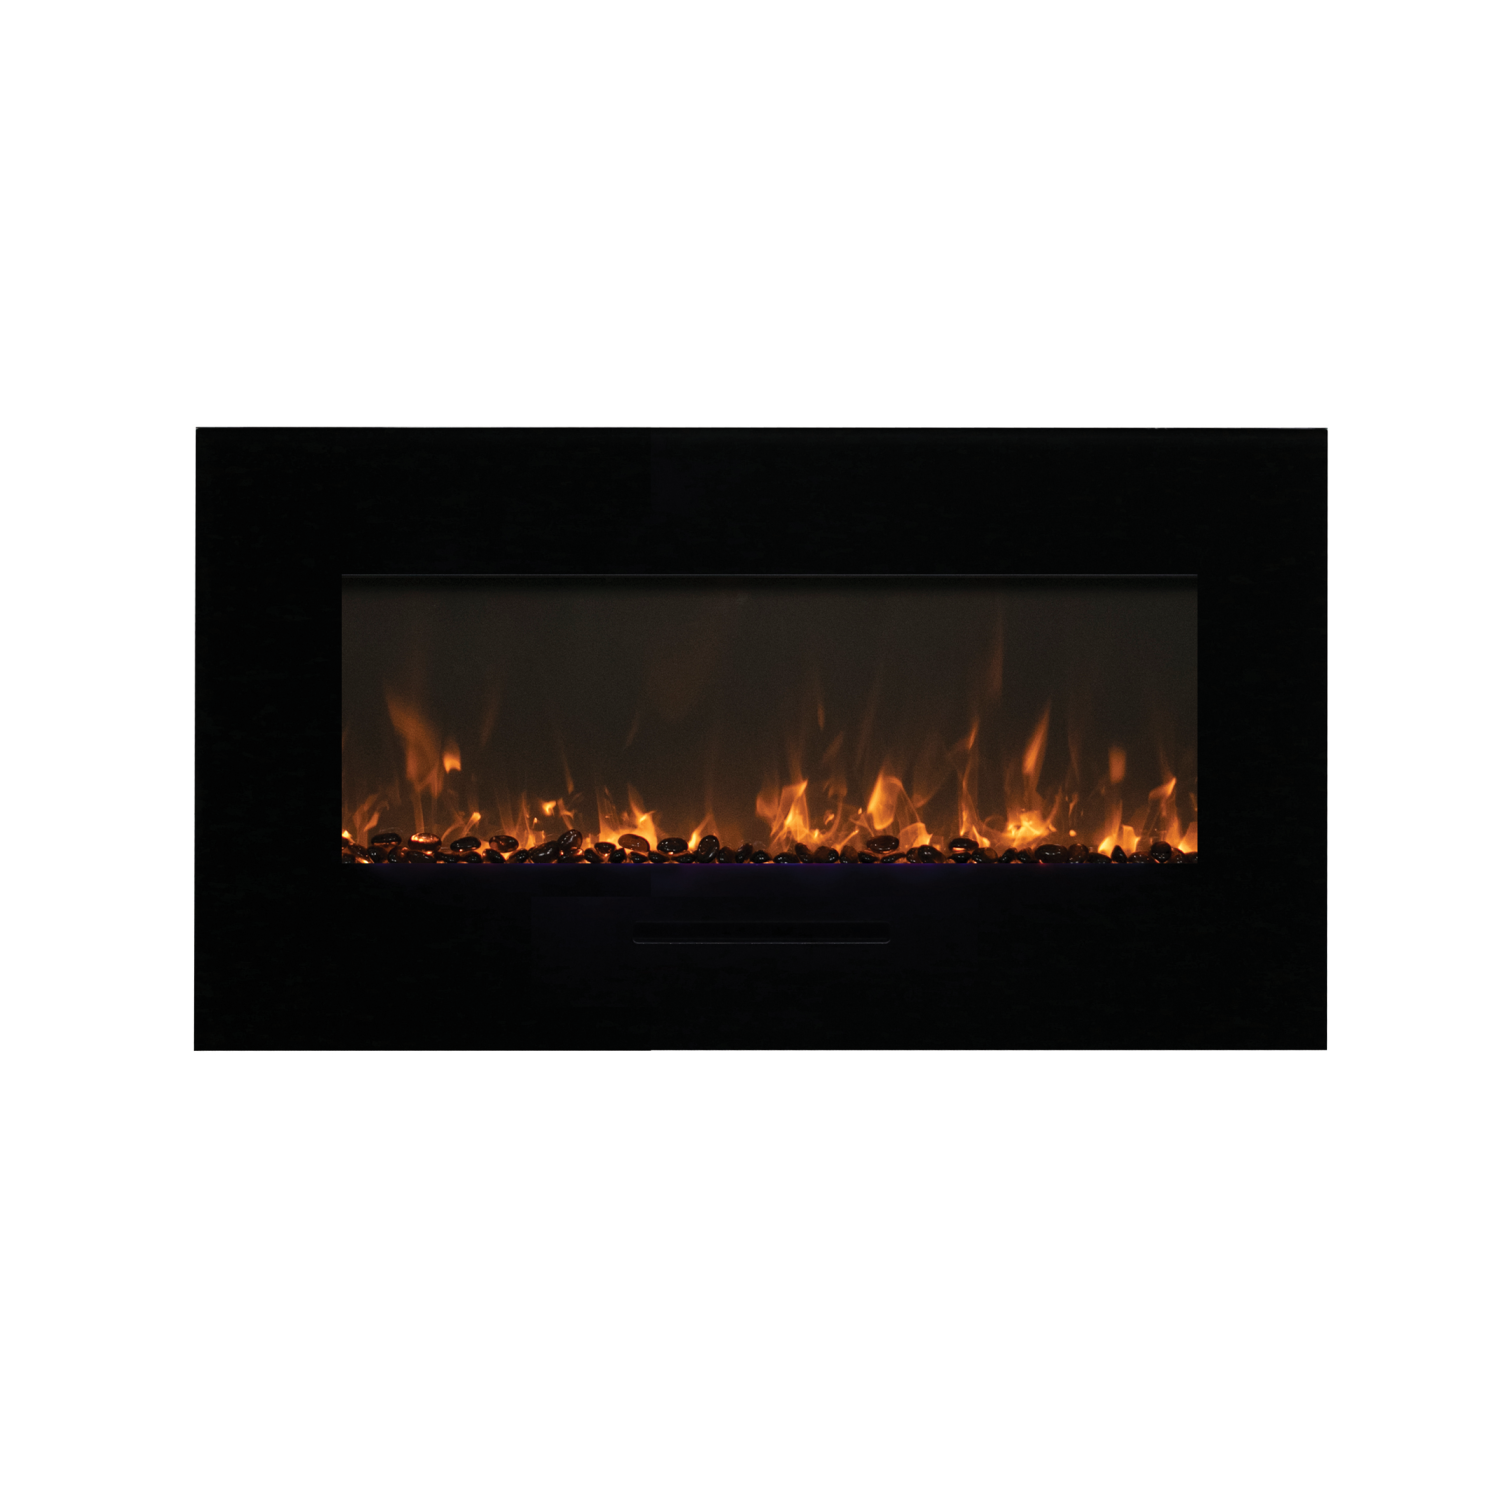 Amantii WM-BI-34-4423-OOB-3 – 44″ x 23″-Refurbished(Excellent)- Electric Fireplace with with White Glass Surround